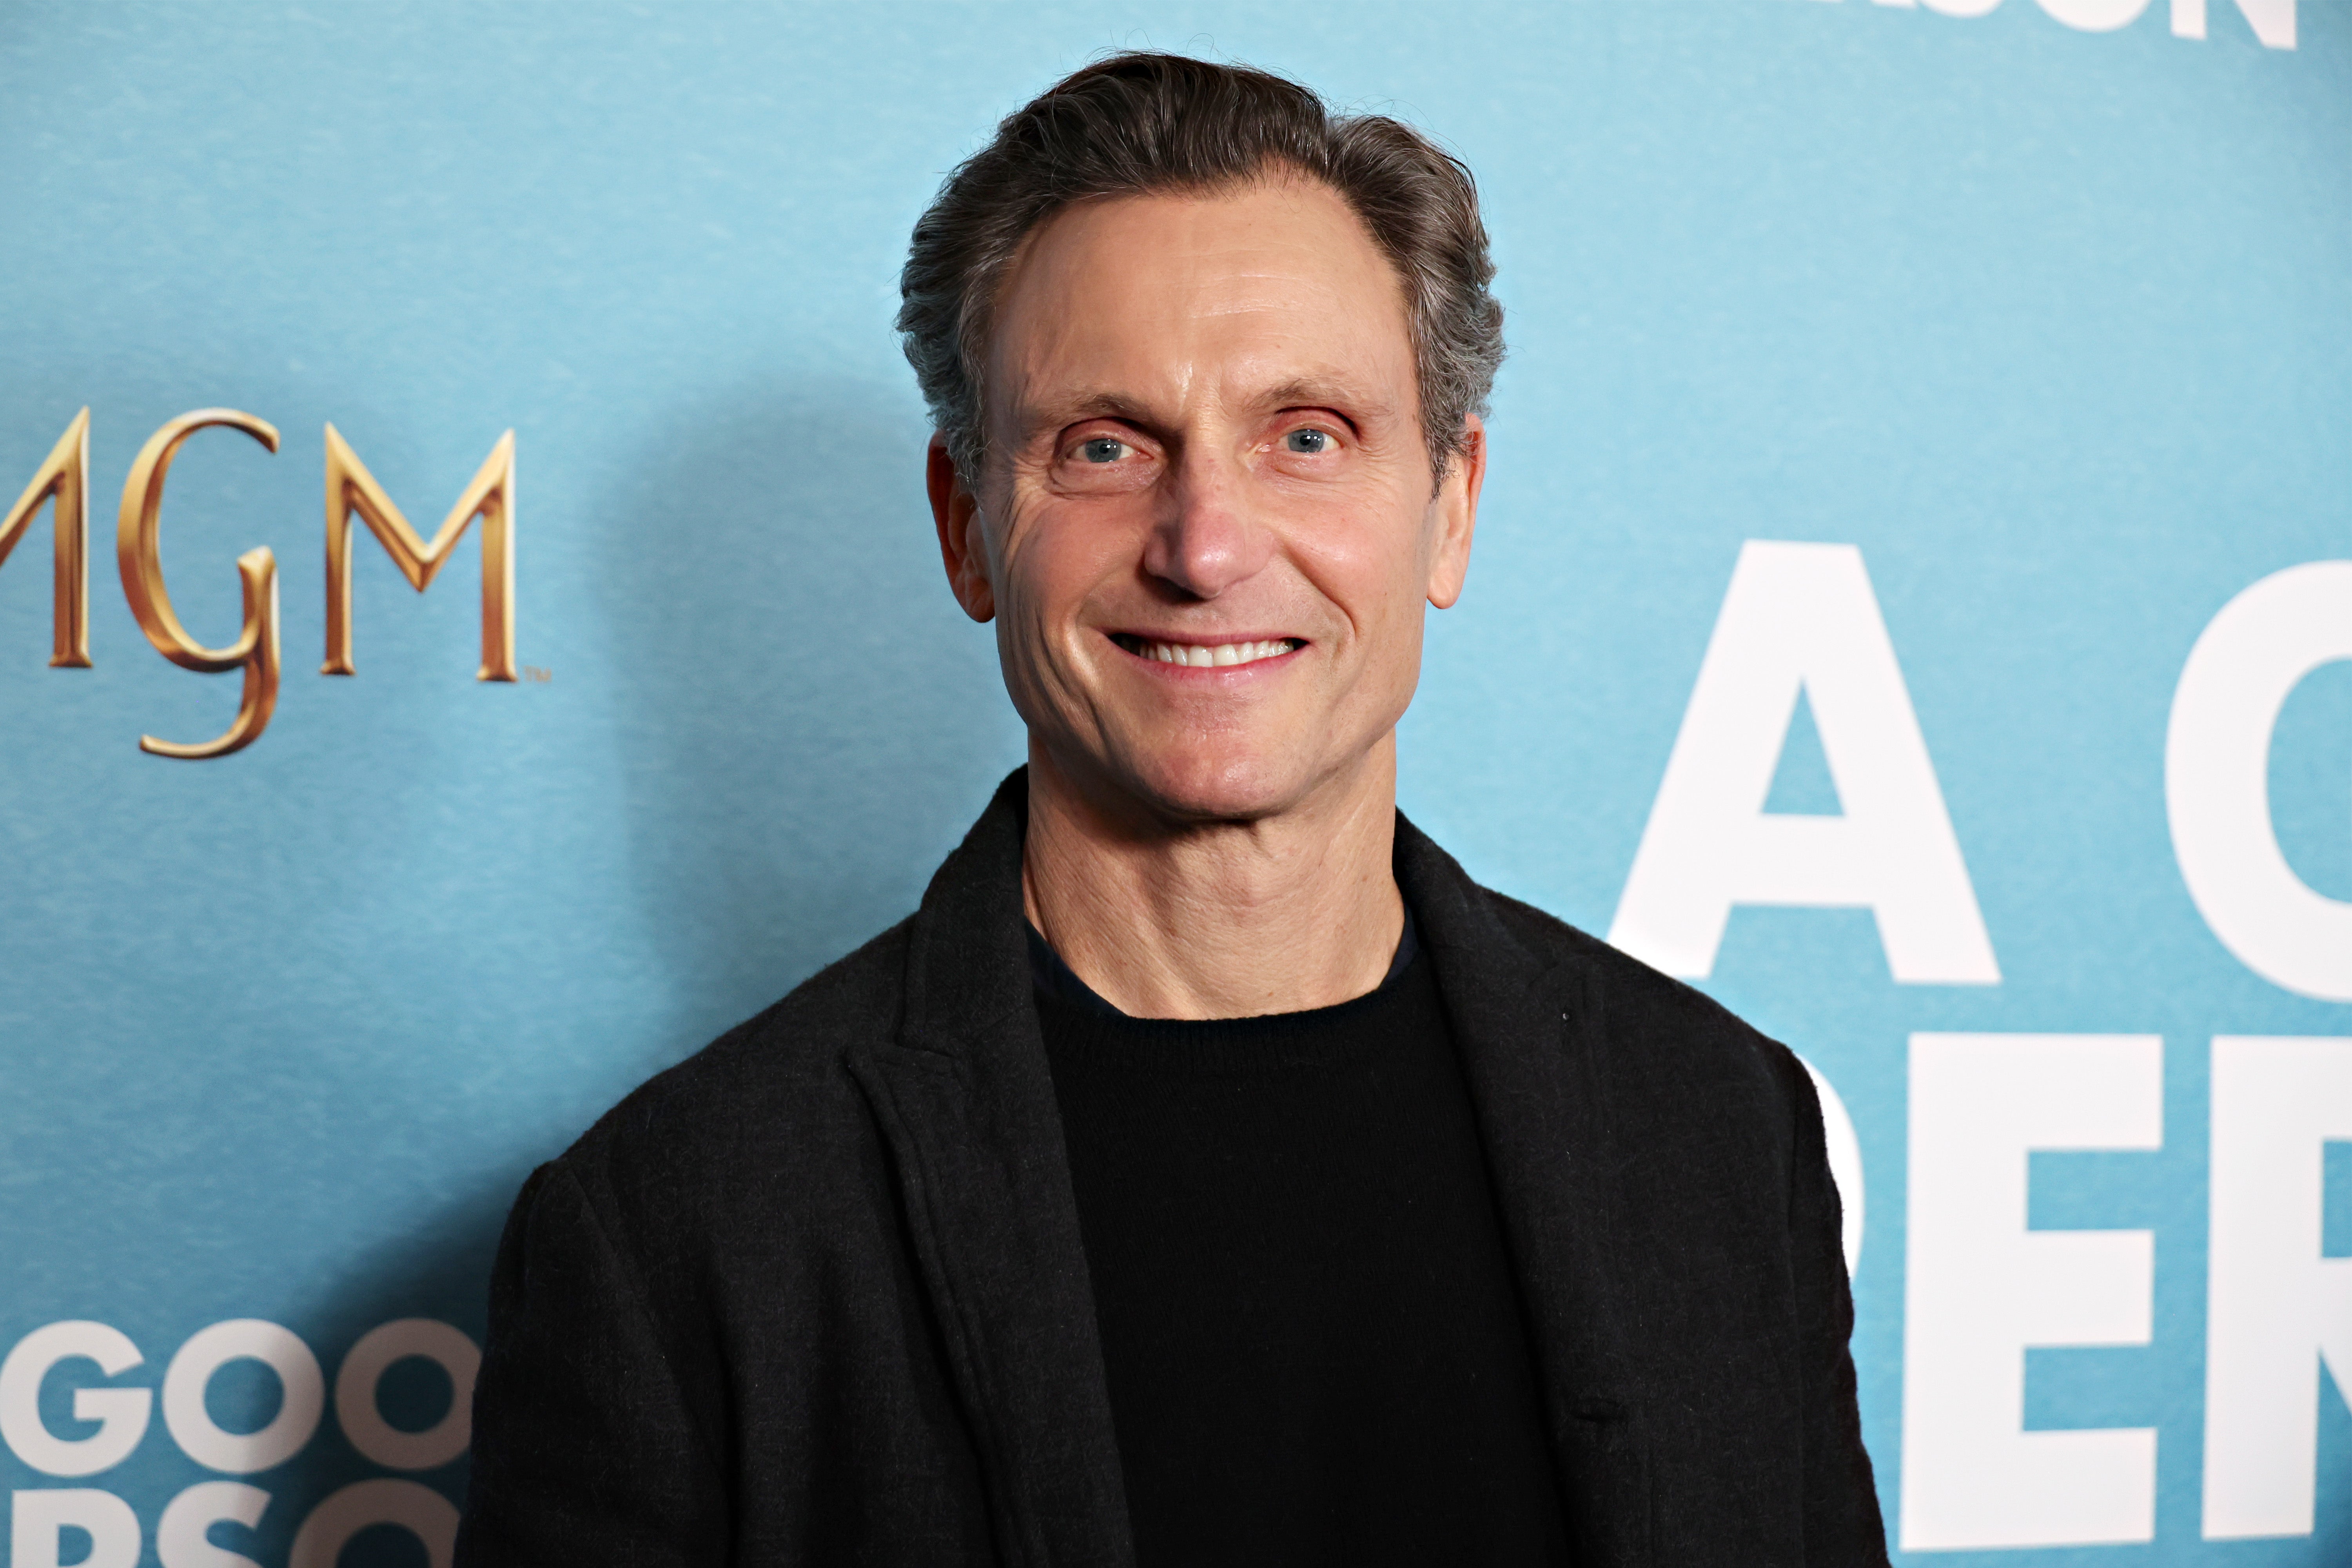 Tony Goldwyn (pictured at a screening of MGMG’s ‘A Good Person’ on 20 March 2023 in New York City) voices Alexander Hamilton in the show